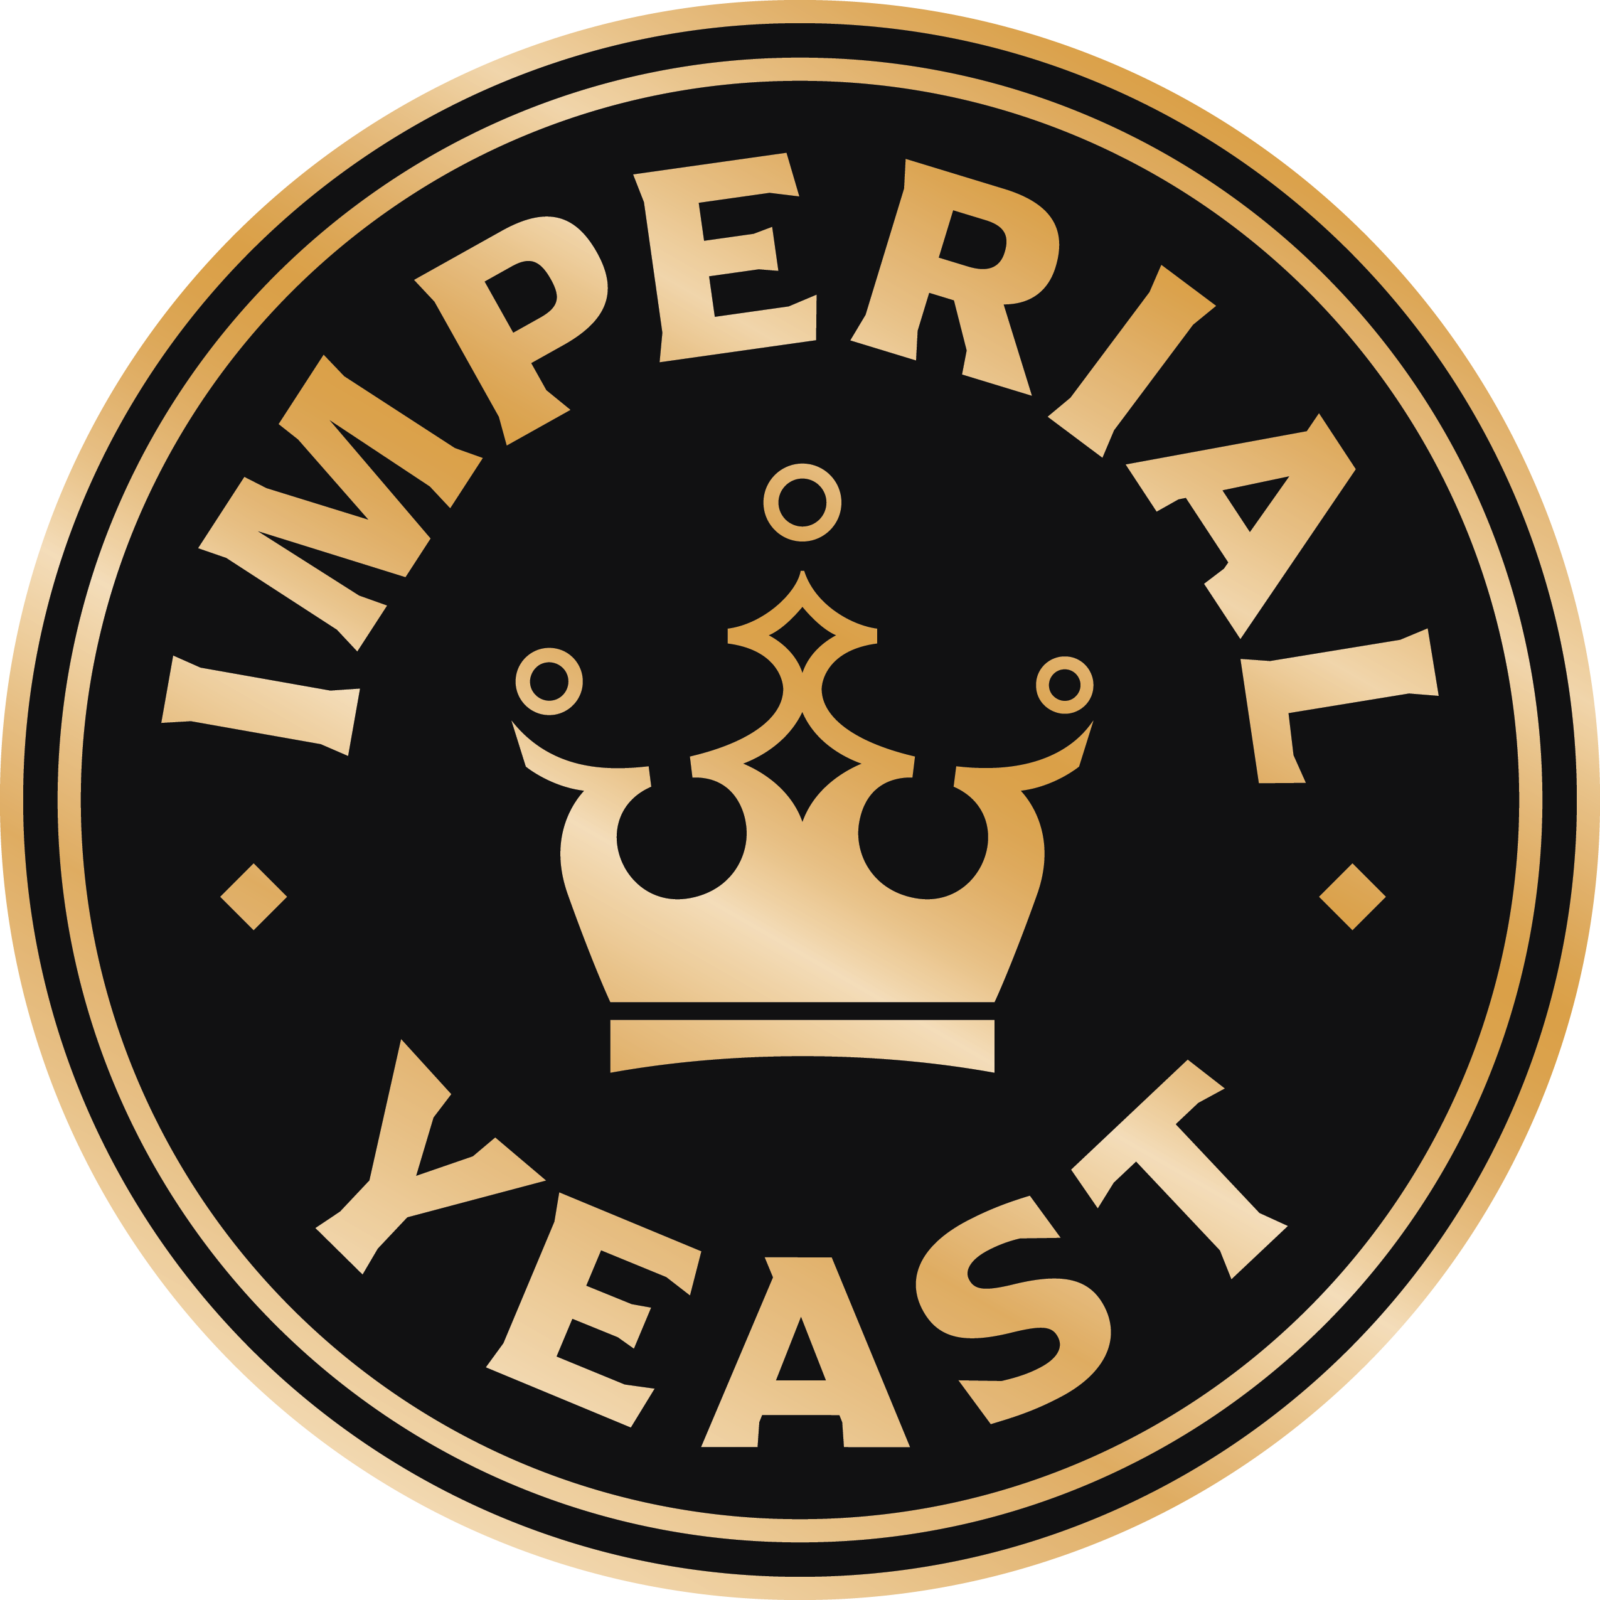 Imperial Yeast logo